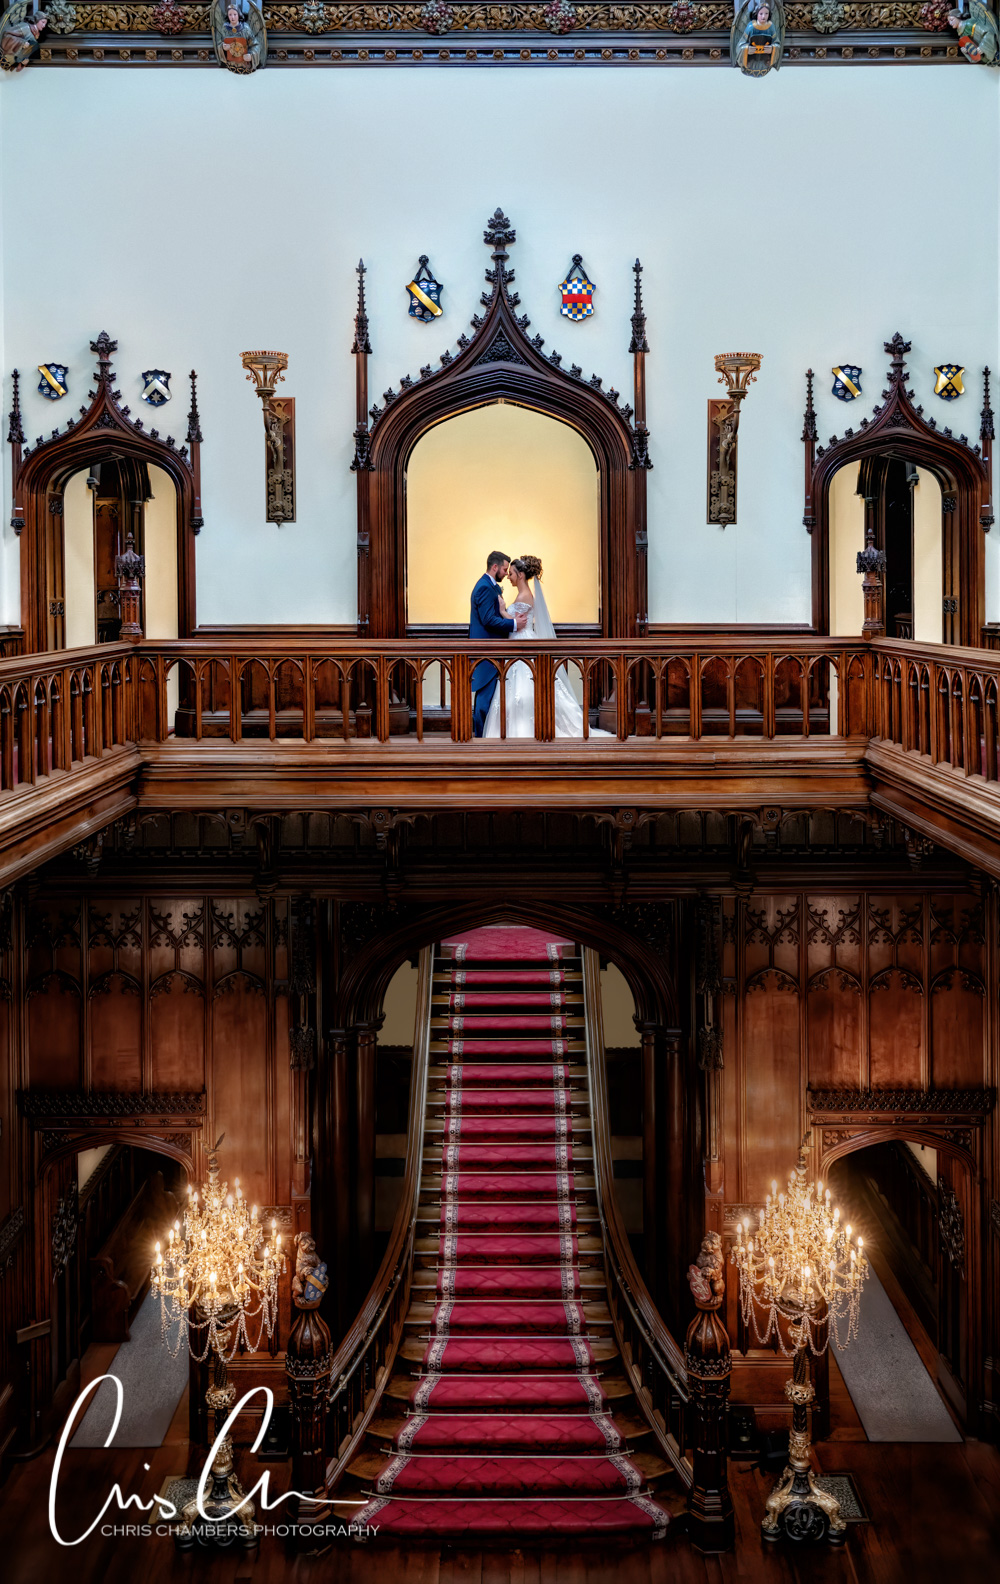 Bride and groom standing above the staircase and gallery at Allerton Castle North Yorkshire. Award winning wedding photograph from the Guild of Photographers